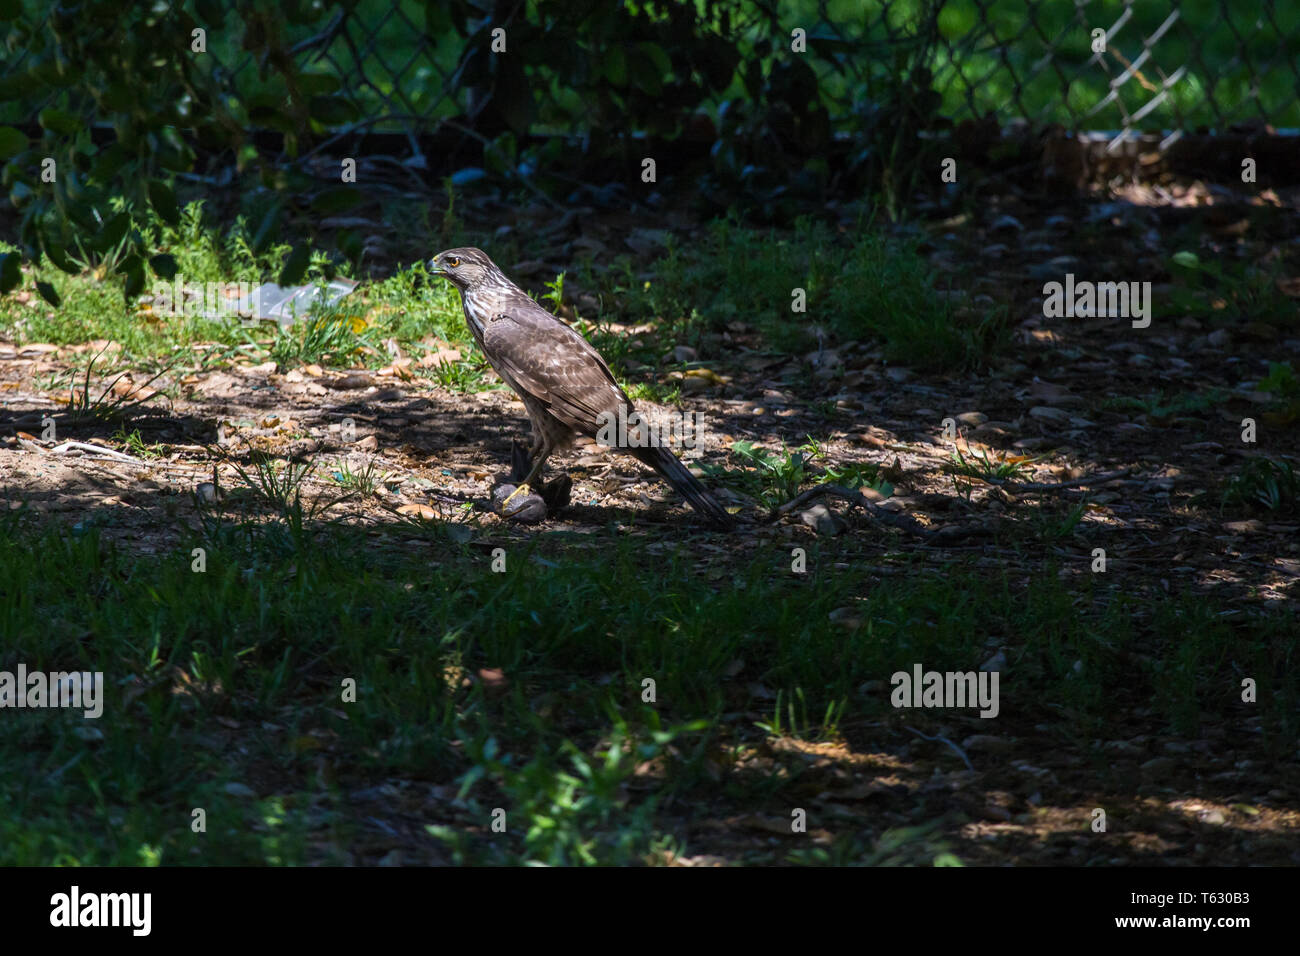 Coopers hawk  Accipiter cooperii with a kill in a wooded area of Orange county, Southern California, USA Stock Photo